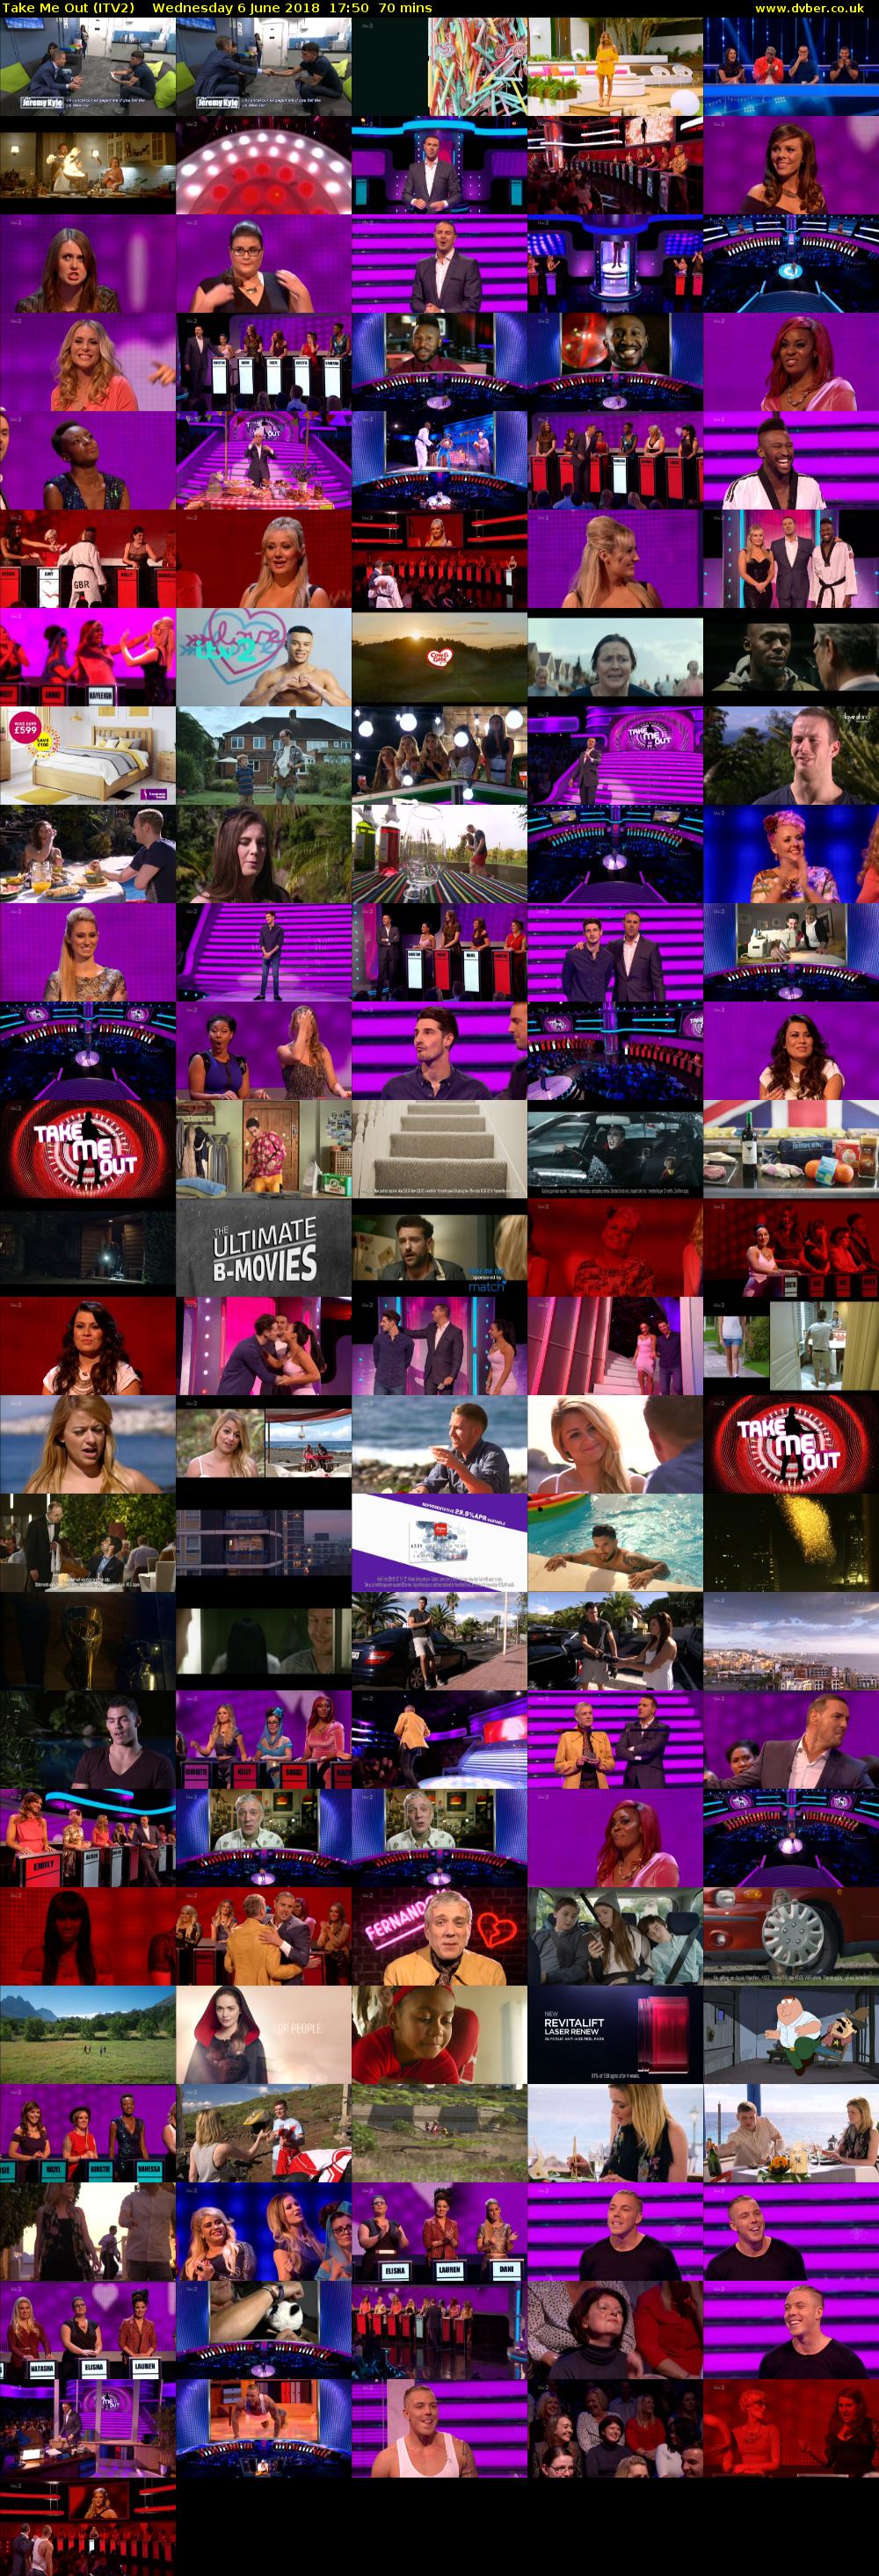 Take Me Out (ITV2) Wednesday 6 June 2018 17:50 - 19:00